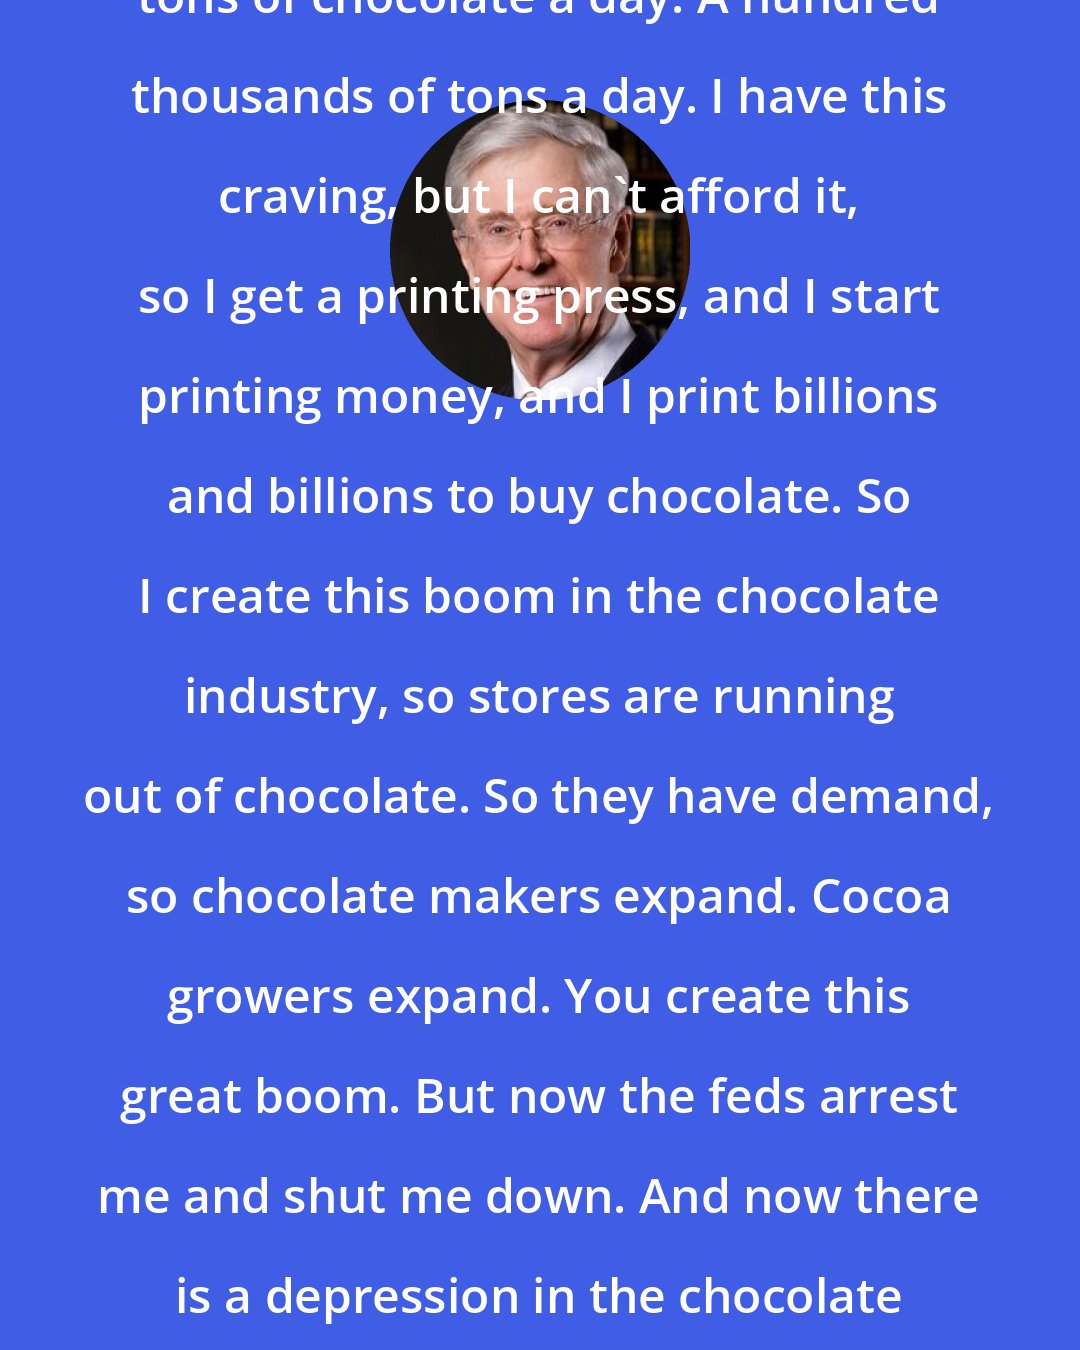 Charles Koch: Let's say I am a chocoholic and I eat tons of chocolate a day. A hundred thousands of tons a day. I have this craving, but I can't afford it, so I get a printing press, and I start printing money, and I print billions and billions to buy chocolate. So I create this boom in the chocolate industry, so stores are running out of chocolate. So they have demand, so chocolate makers expand. Cocoa growers expand. You create this great boom. But now the feds arrest me and shut me down. And now there is a depression in the chocolate industry. That's what happens with the monetary policy.